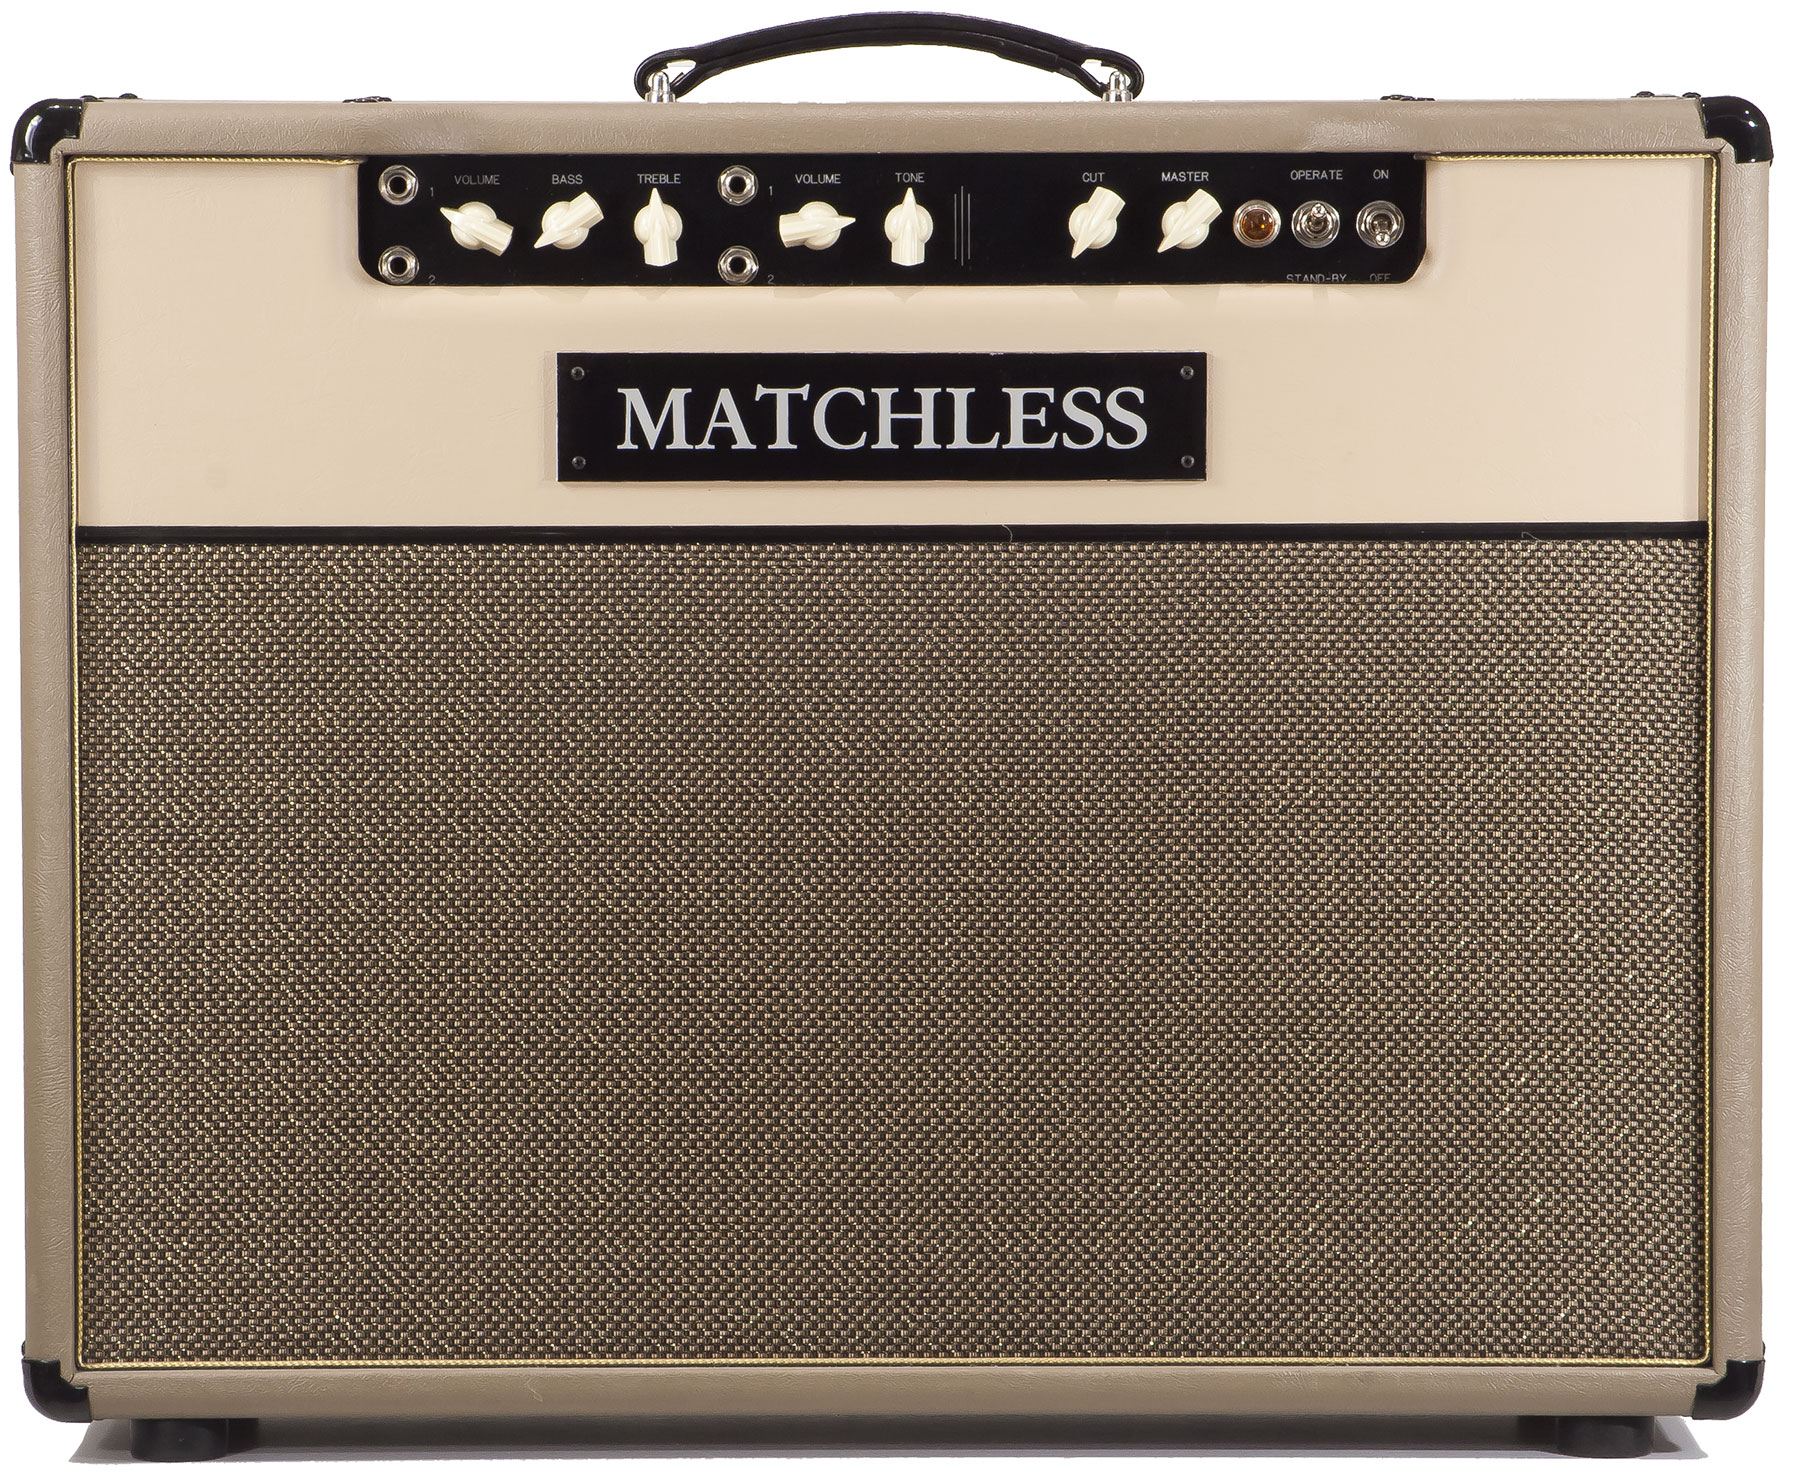 Matchless Dc-30 30w 2x12 Cappuccino/gold - Electric guitar combo amp - Variation 4